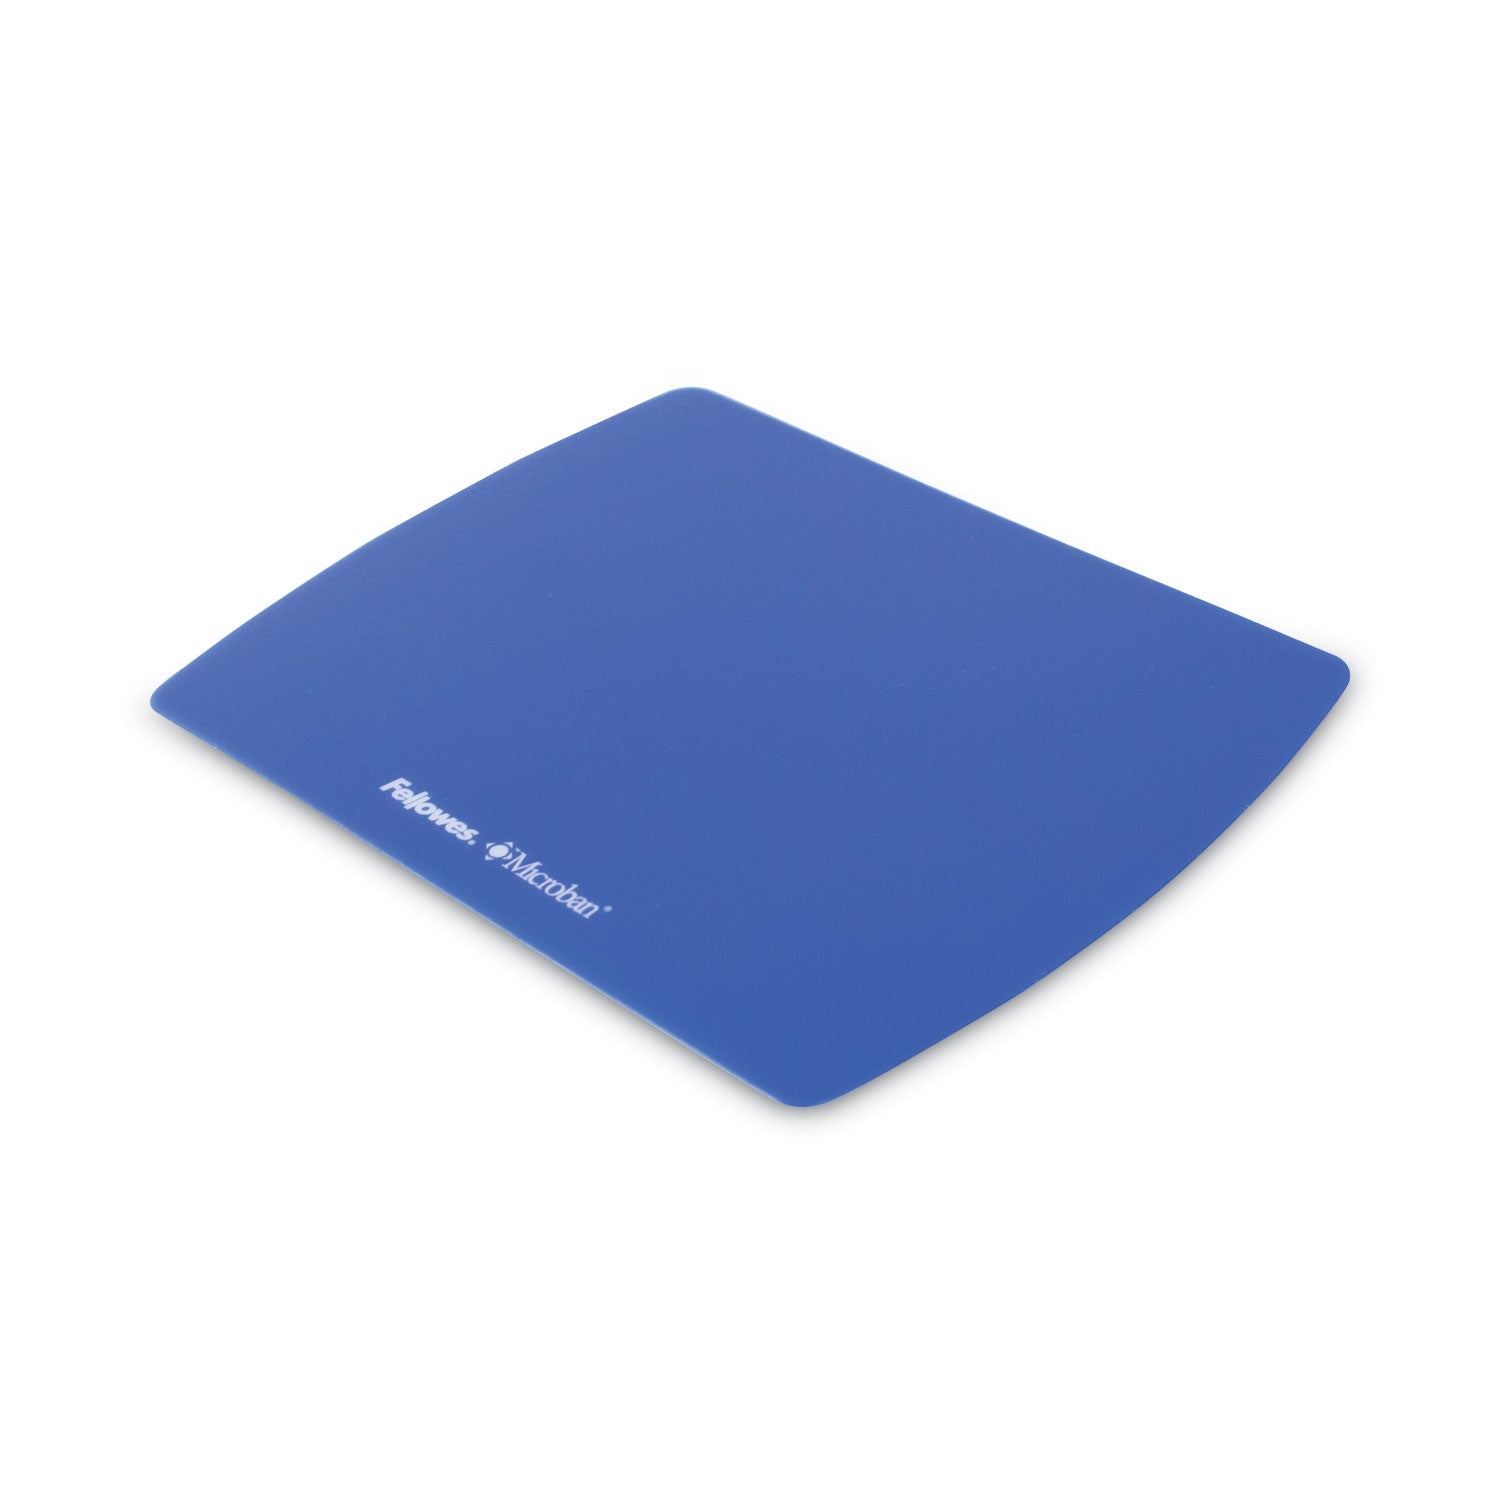 Ultra Thin Mouse Pad with Microban Protection, 9 x 7, Sapphire Blue - 